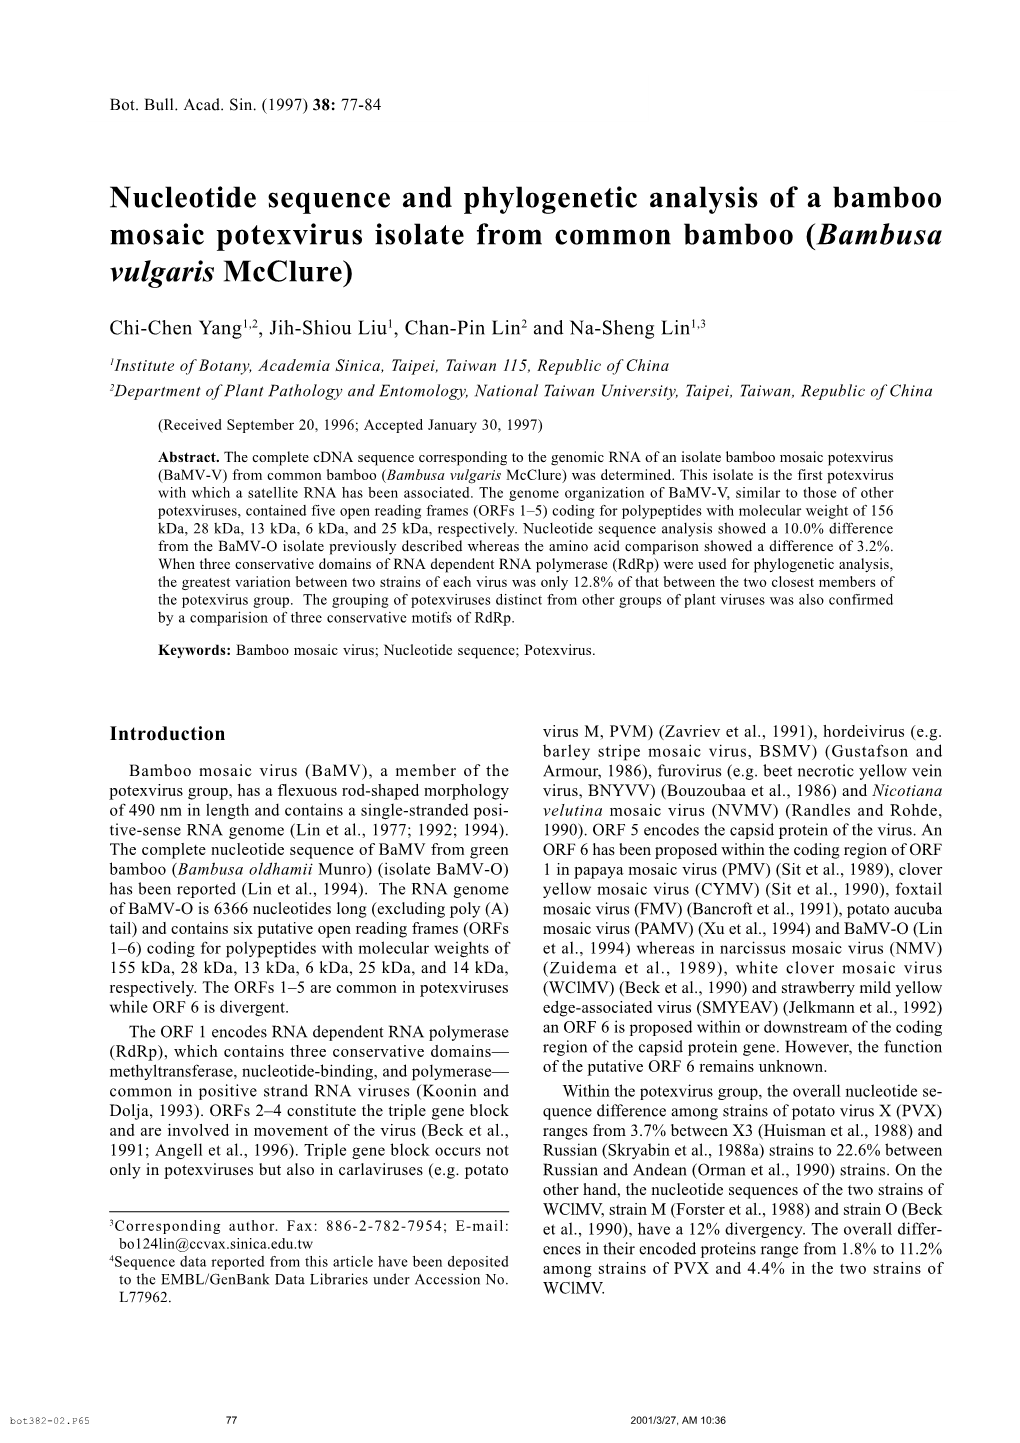 Nucleotide Sequence and Phylogenetic Analysis of a Bamboo Mosaic Potexvirus Isolate from Common Bamboo (Bambusa Vulgaris Mcclure)